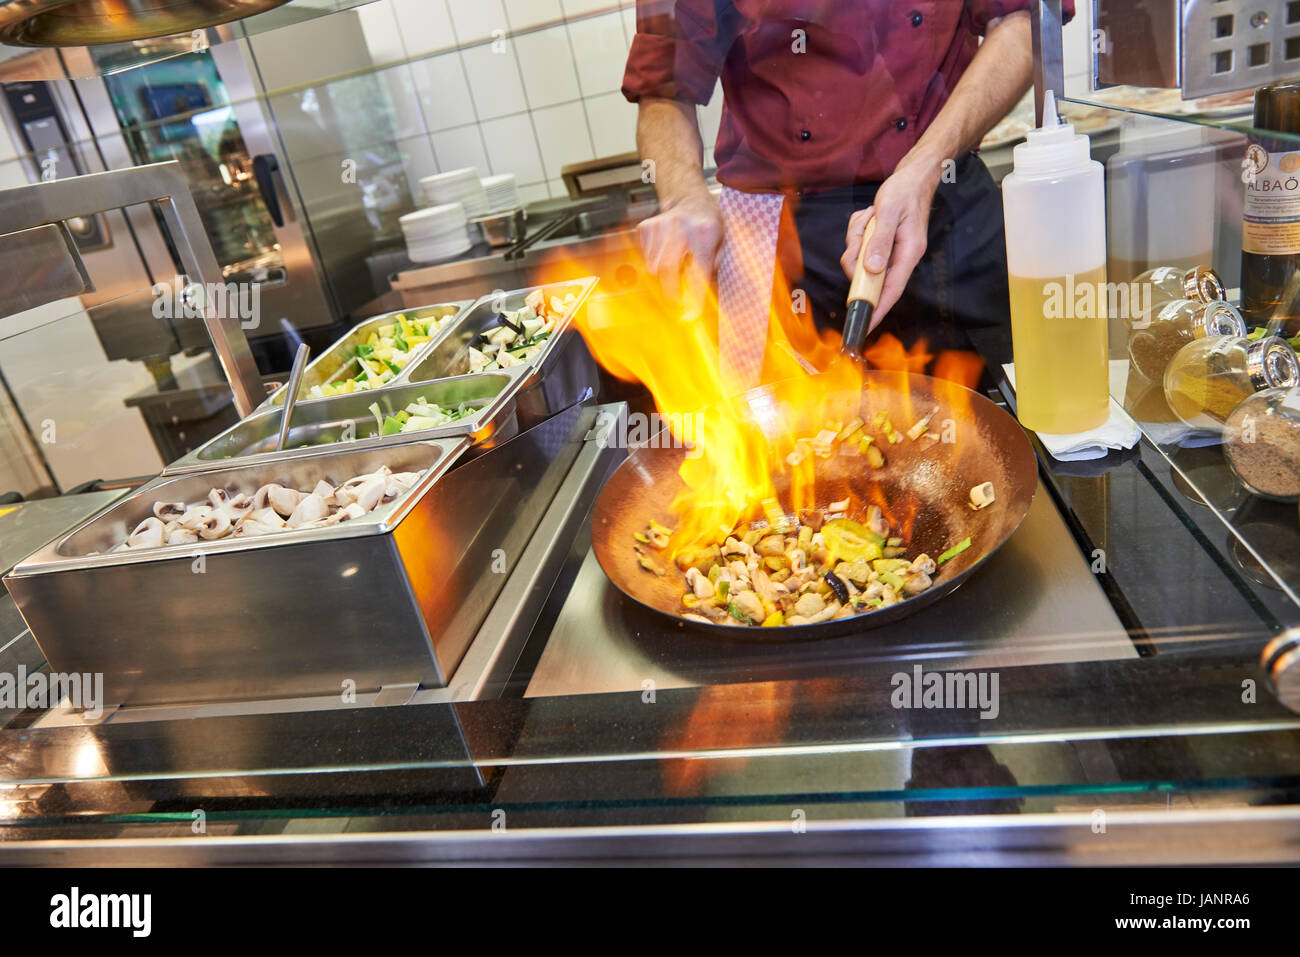 cook in a commercial kitchen is flambeing in a frying pan Stock Photo